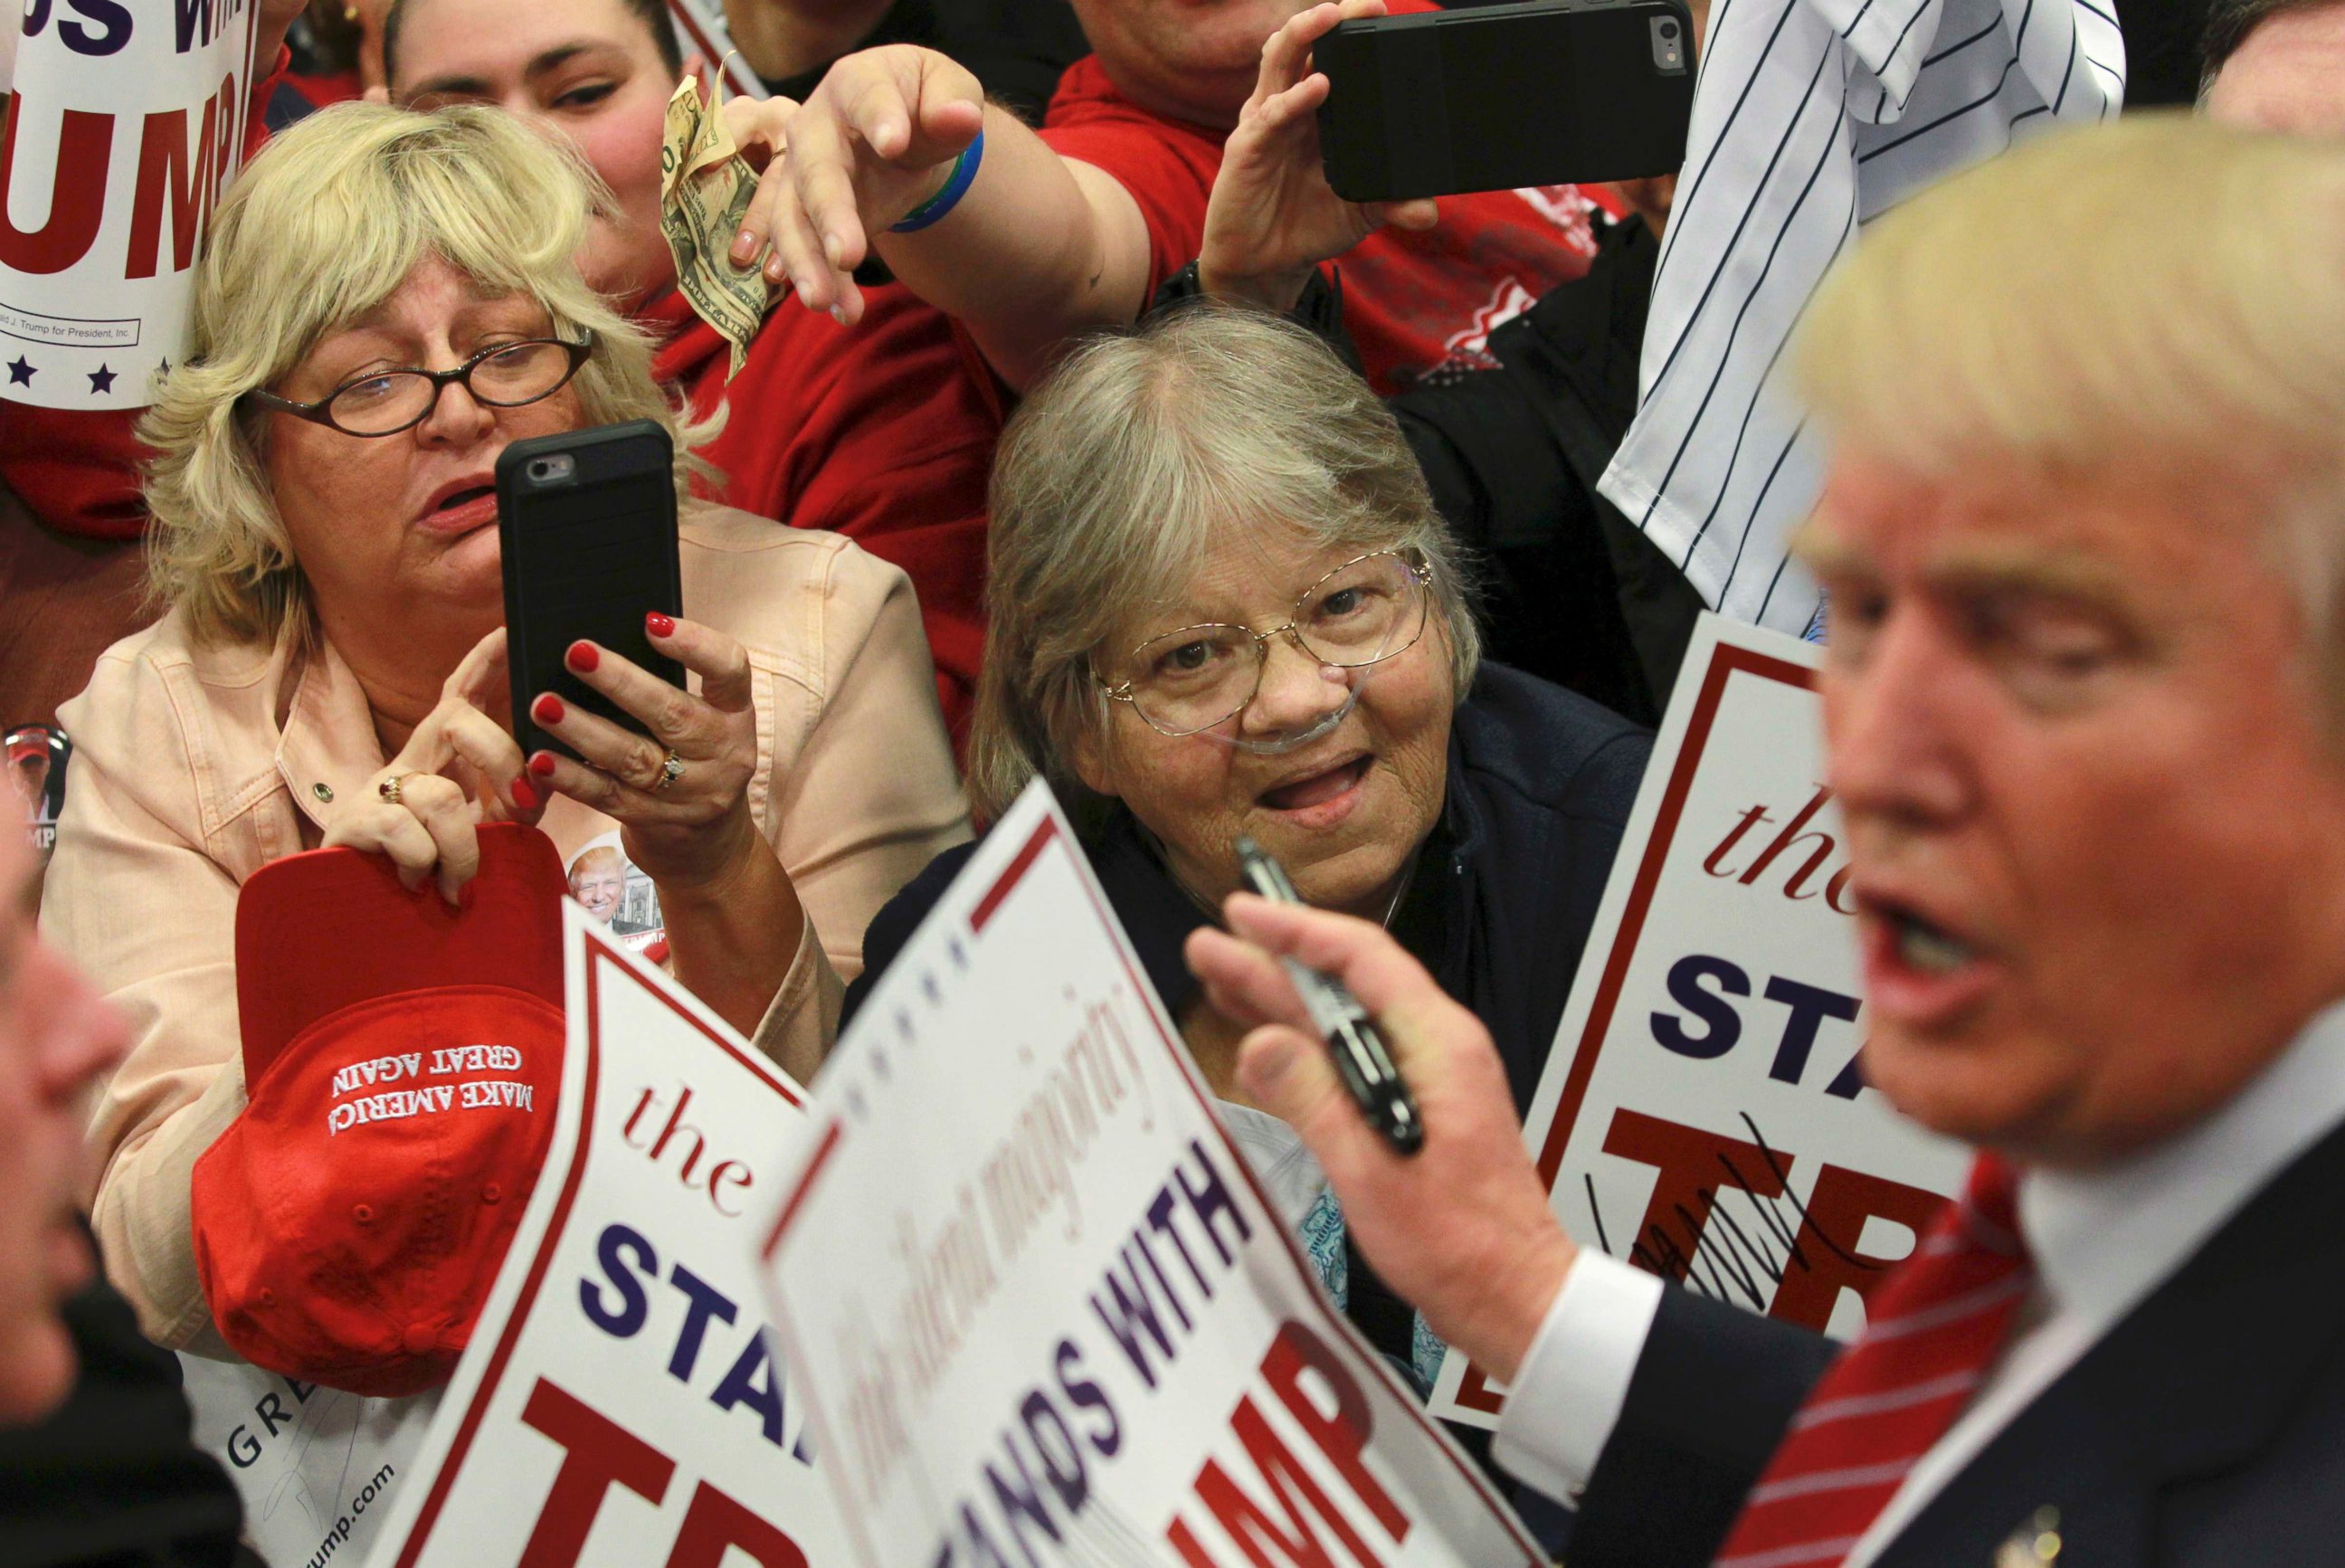 PHOTO: Supporters of Republican U.S. presidential candidate Donald Trump take pictures and seek autographs from Trump (R) at a campaign rally in New Orleans, Louisiana March 4, 2016.   